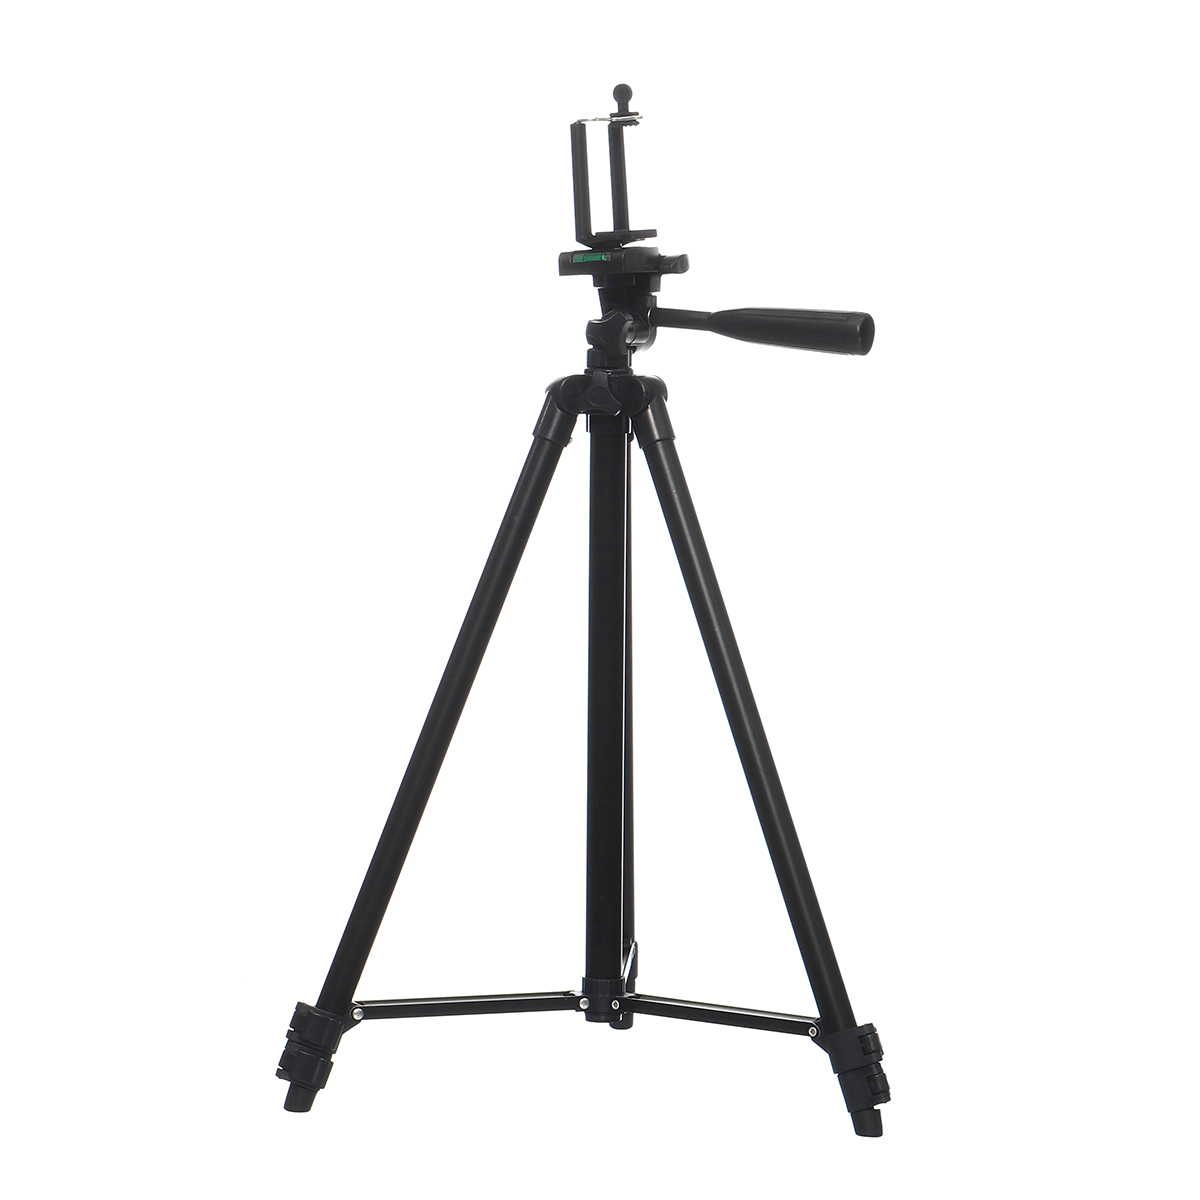 13m-3-Sections-Aluminum-Alloy-Tripod-Phone-Holder-With-Phone-Clip-For-iPhone-Samsung-Huawei-1429649-4